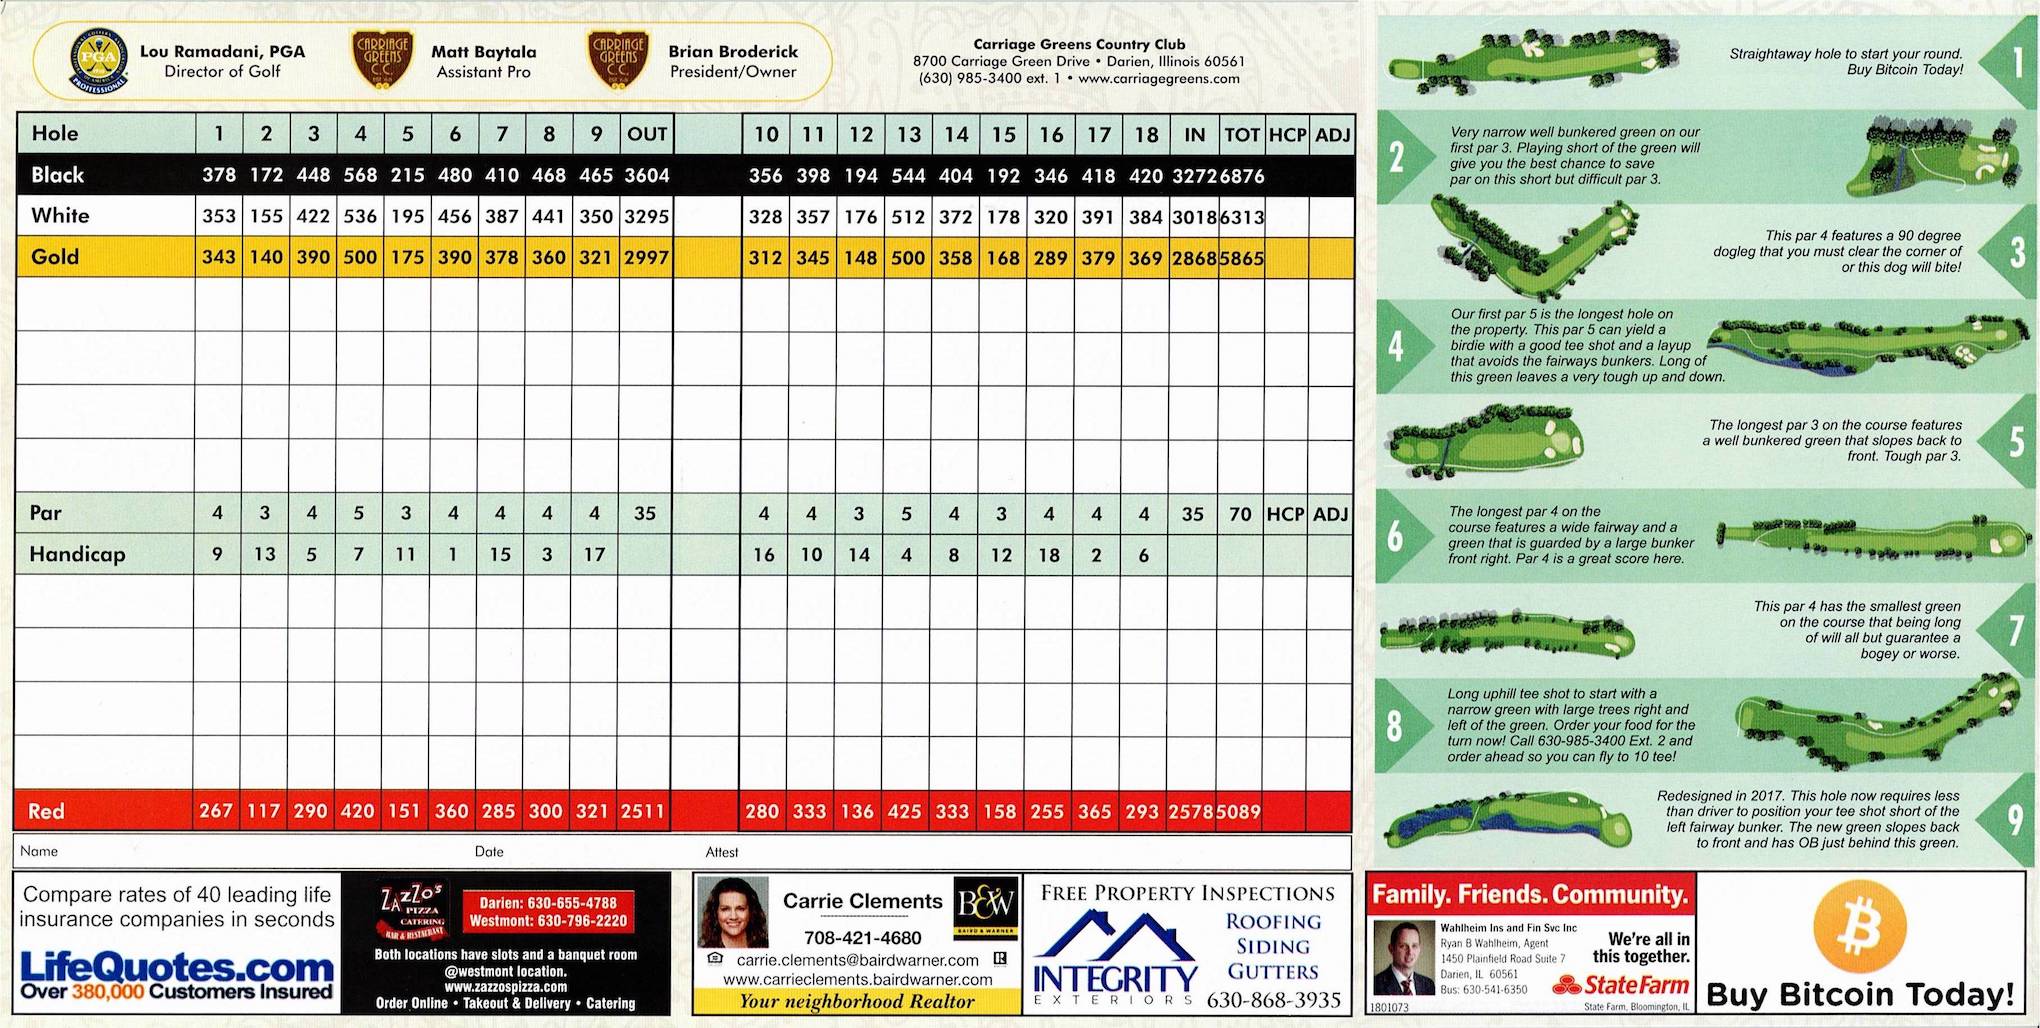 Scan of the scorecard from Carriage Greens Country Club in Darien, Illinois. It also has a "Buy Bitcoin Today" promo in the bottom right and also in the course rules. Never seen that on a scorecard before!